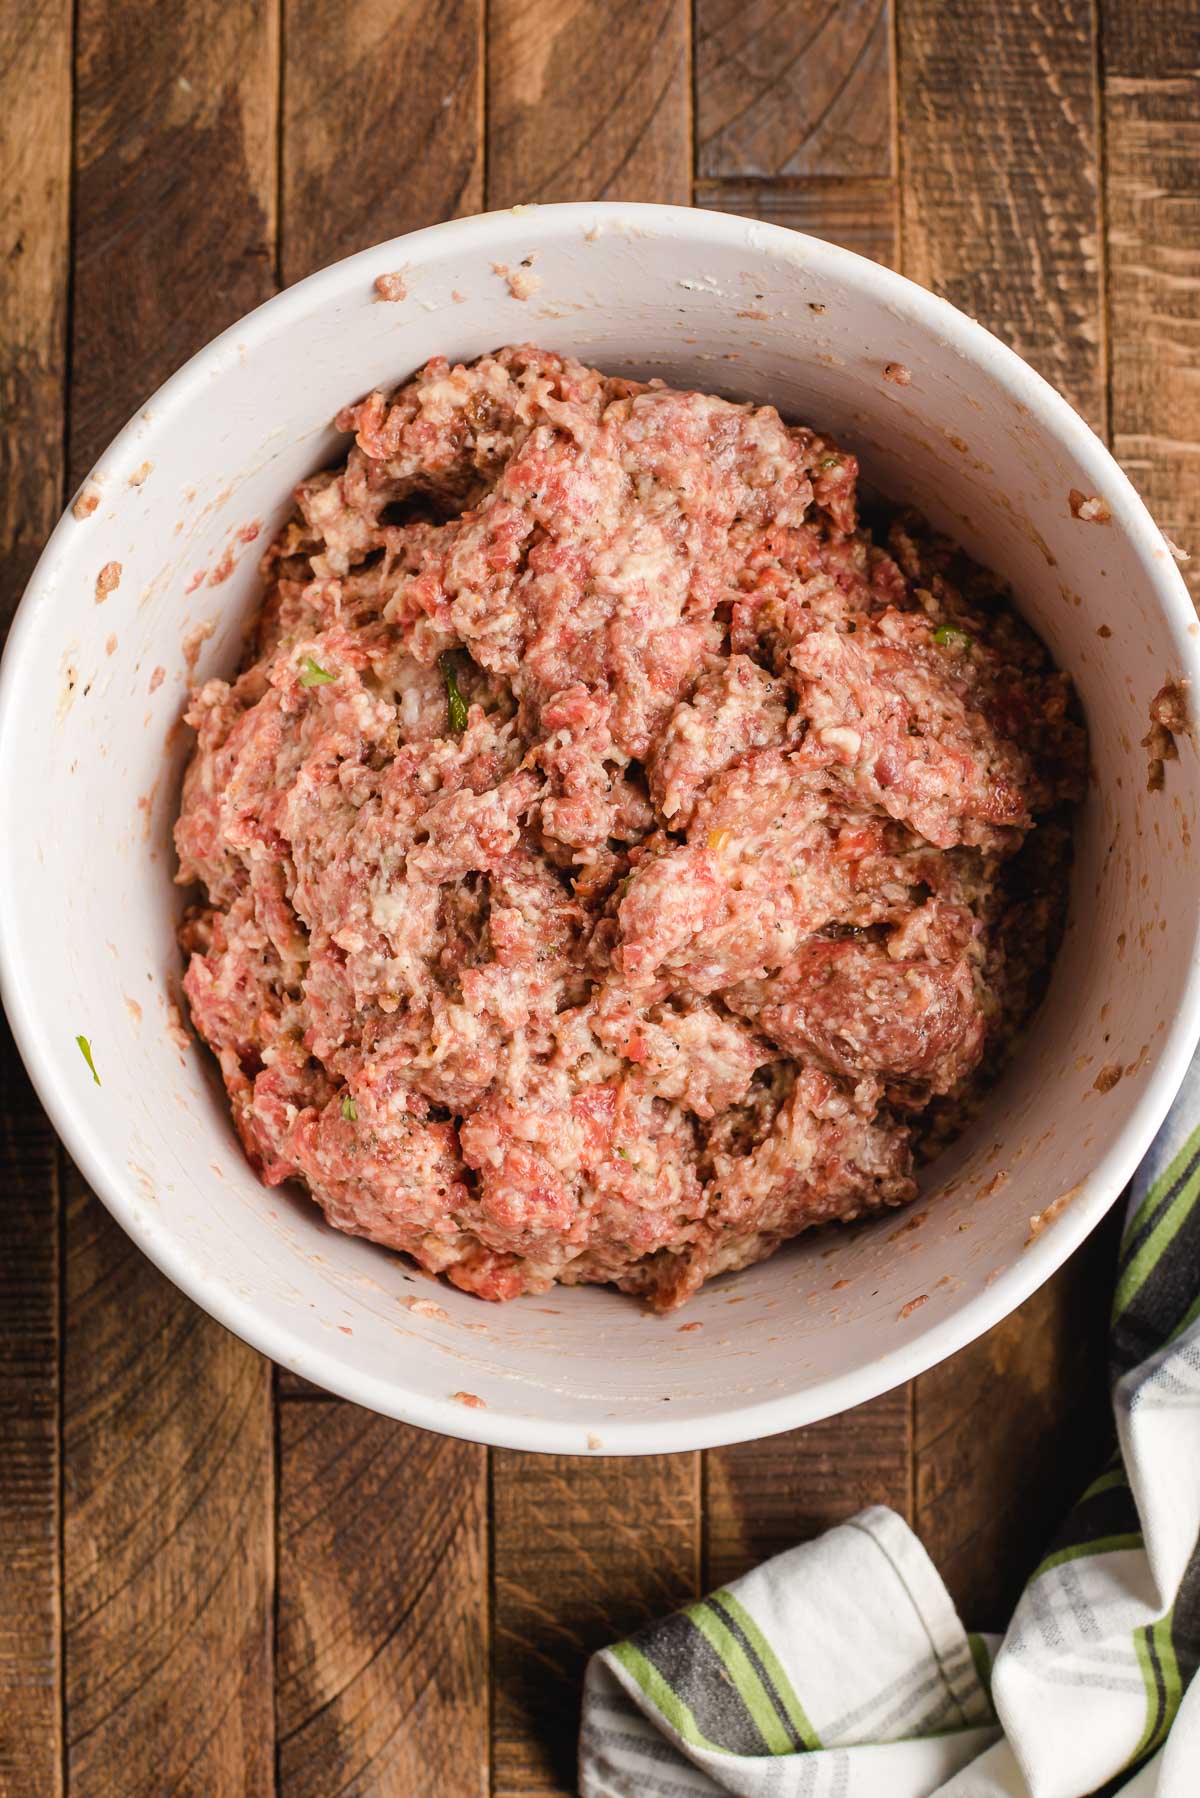 Meat mixture for homemade meatballs in a bowl.